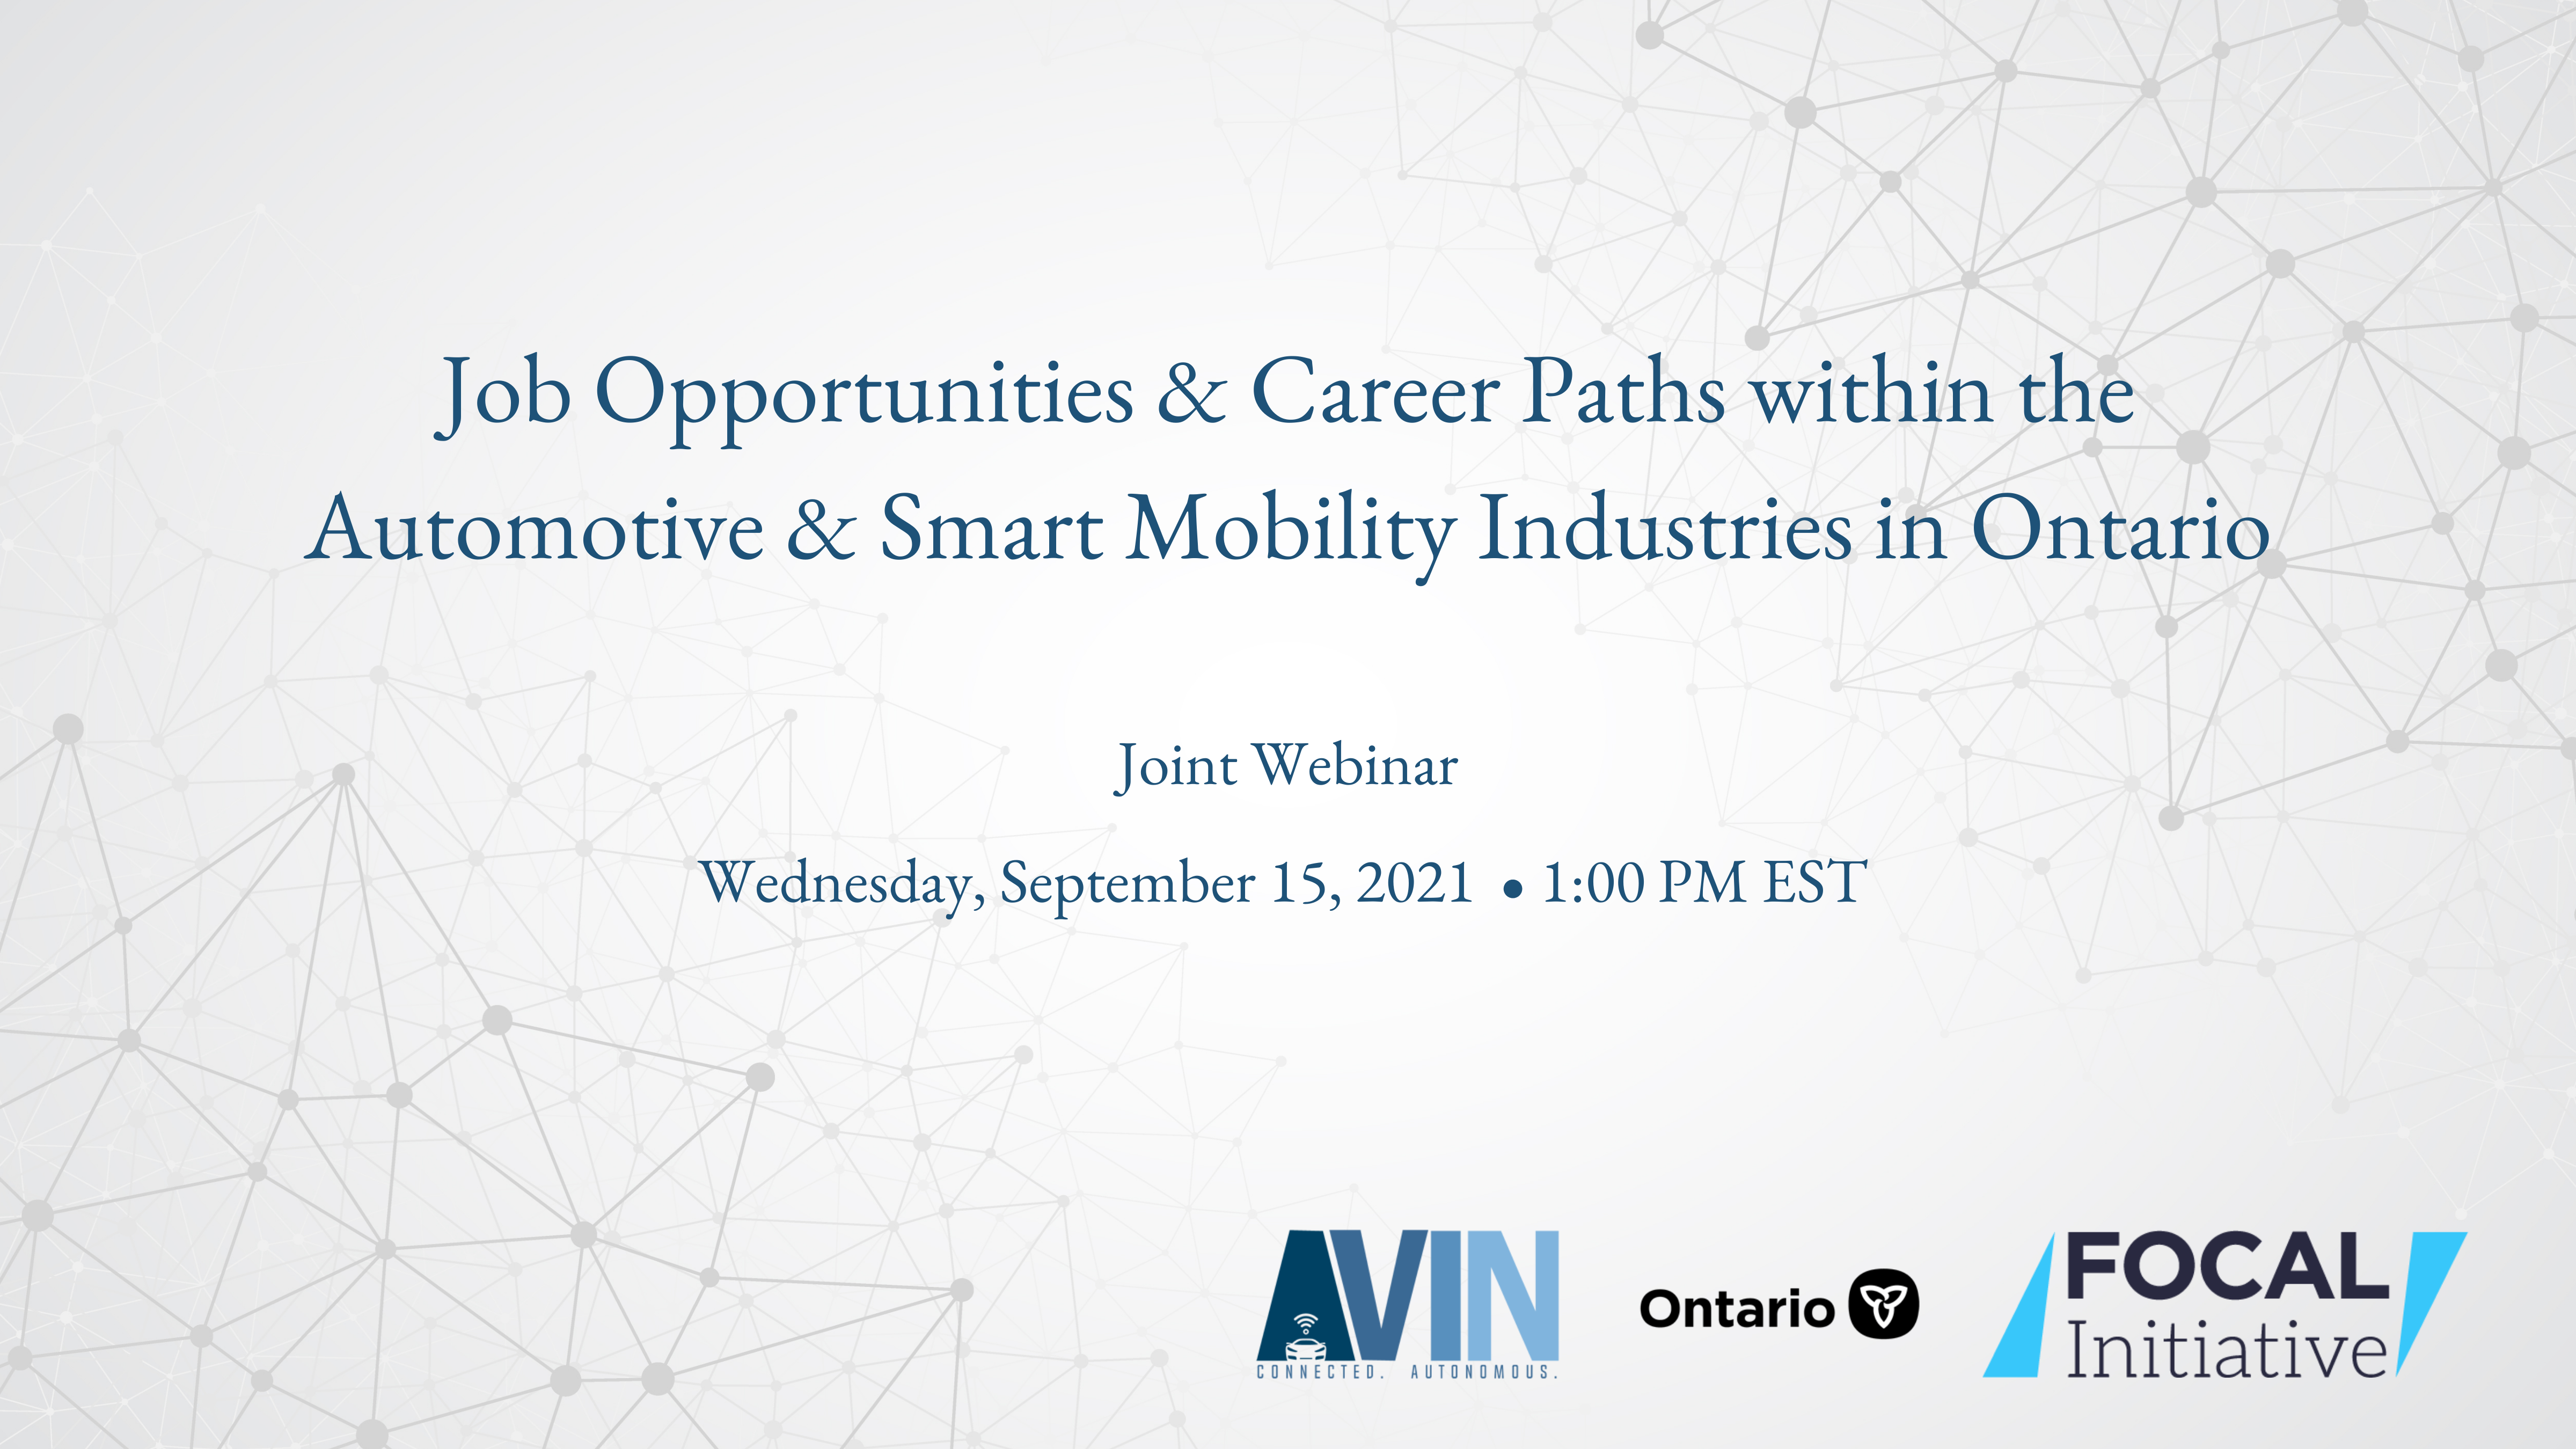 Technology, Jobs, and the Automotive and Smart Mobility Industry in Ontario